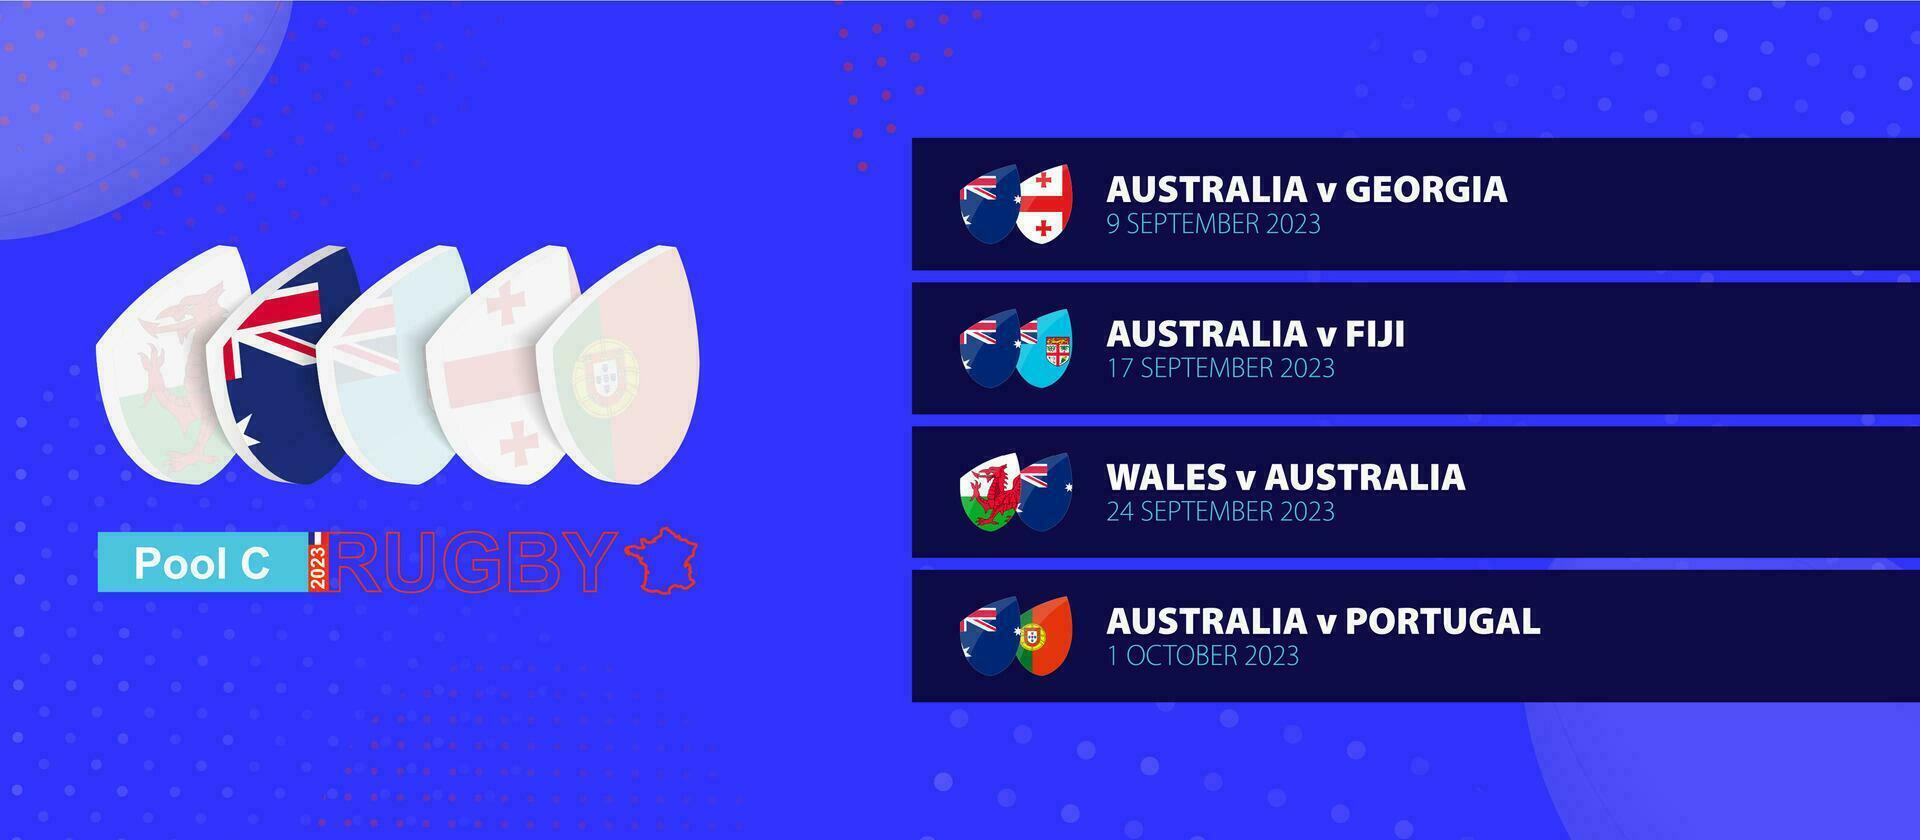 Australia rugby national team schedule matches in group stage of international rugby competition. vector